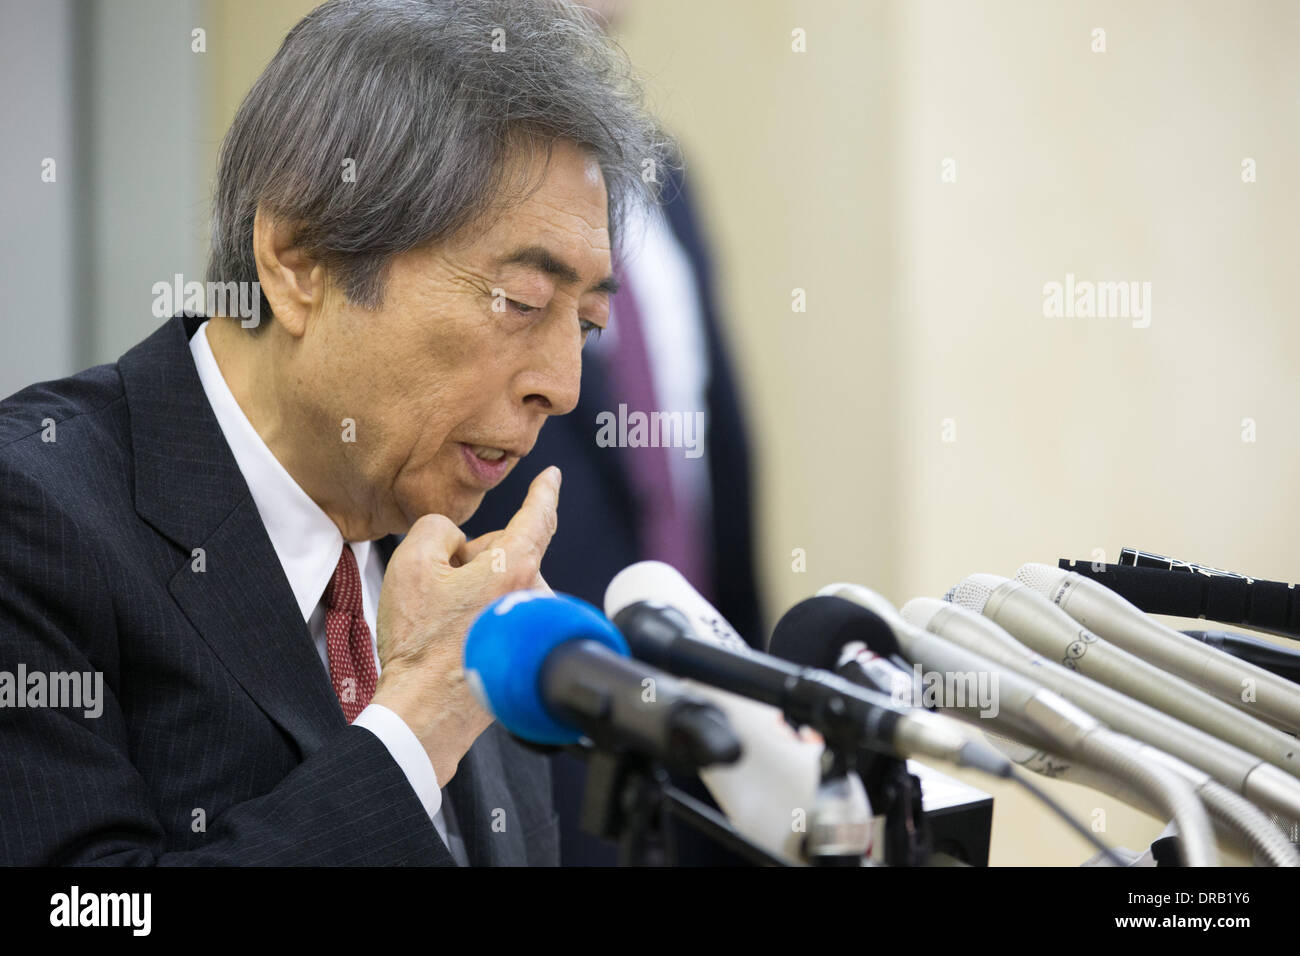 Tokyo, Japan. 22nd Jan, 2014. Japan's former Prime Minister Morihito Hosokawa announces his candidacy in the February 9 gubernatorial election during a news conference at the Tokyo City Hall on Wednesday, January 22, 2014, one day before official kick-off of election campaigning. Hosokawa, 76, will campaign side by side on the non-nuclear platform with outspoken ex-Premier Junichciro Koizumi, who has championed the immediate elimination of nuclear power plants across the country. Hosokawa is running against a scholar in international politics, a lawyer and a former four-star air force gener Stock Photo